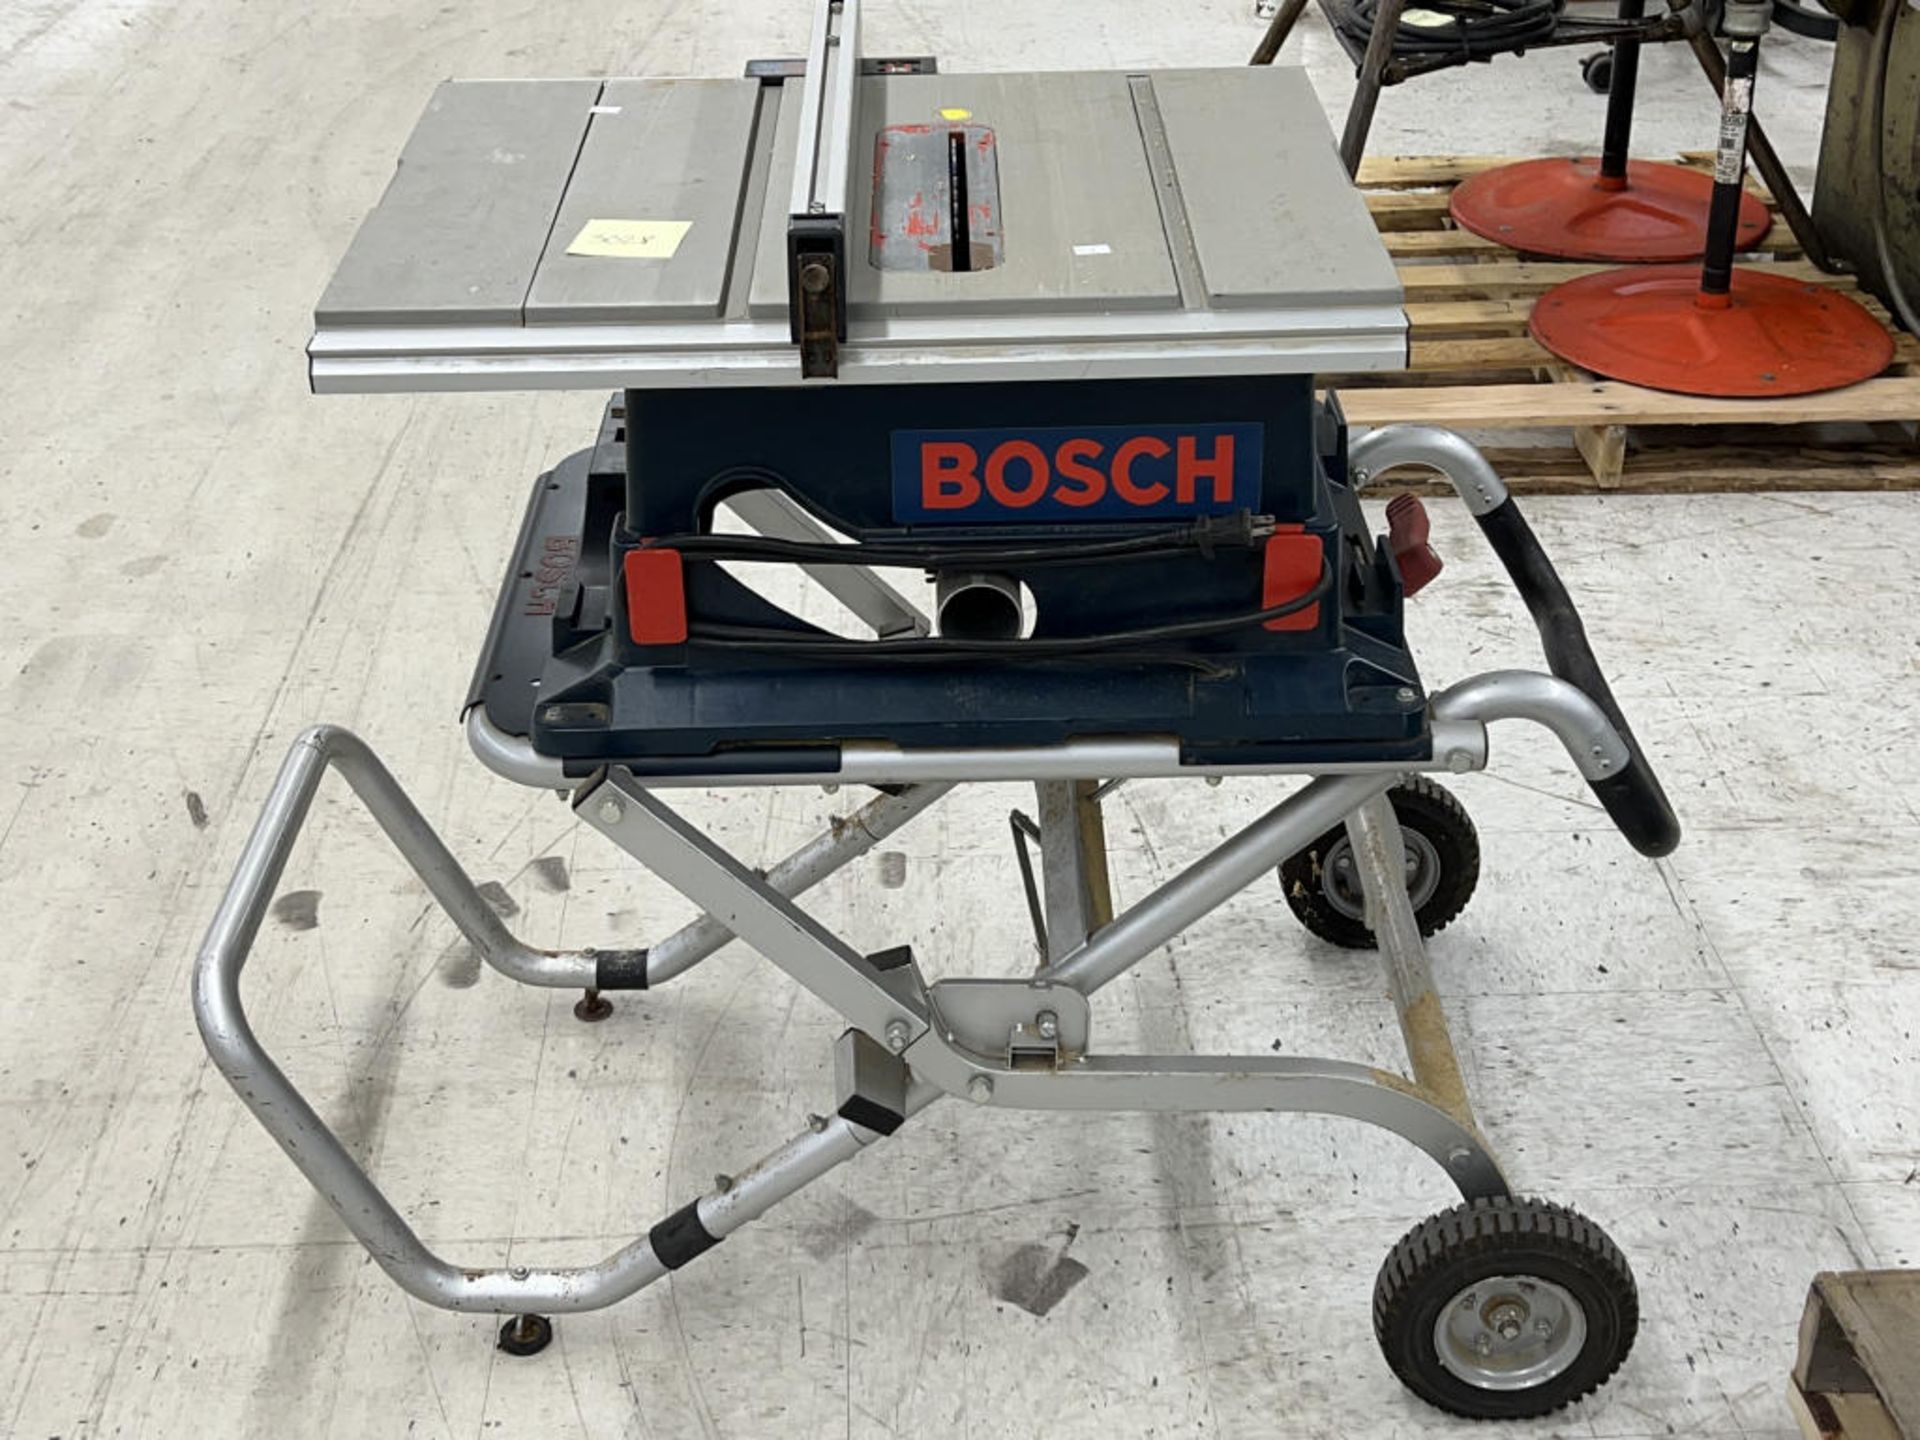 Bosch 4000 10" Table Saw - Image 3 of 3